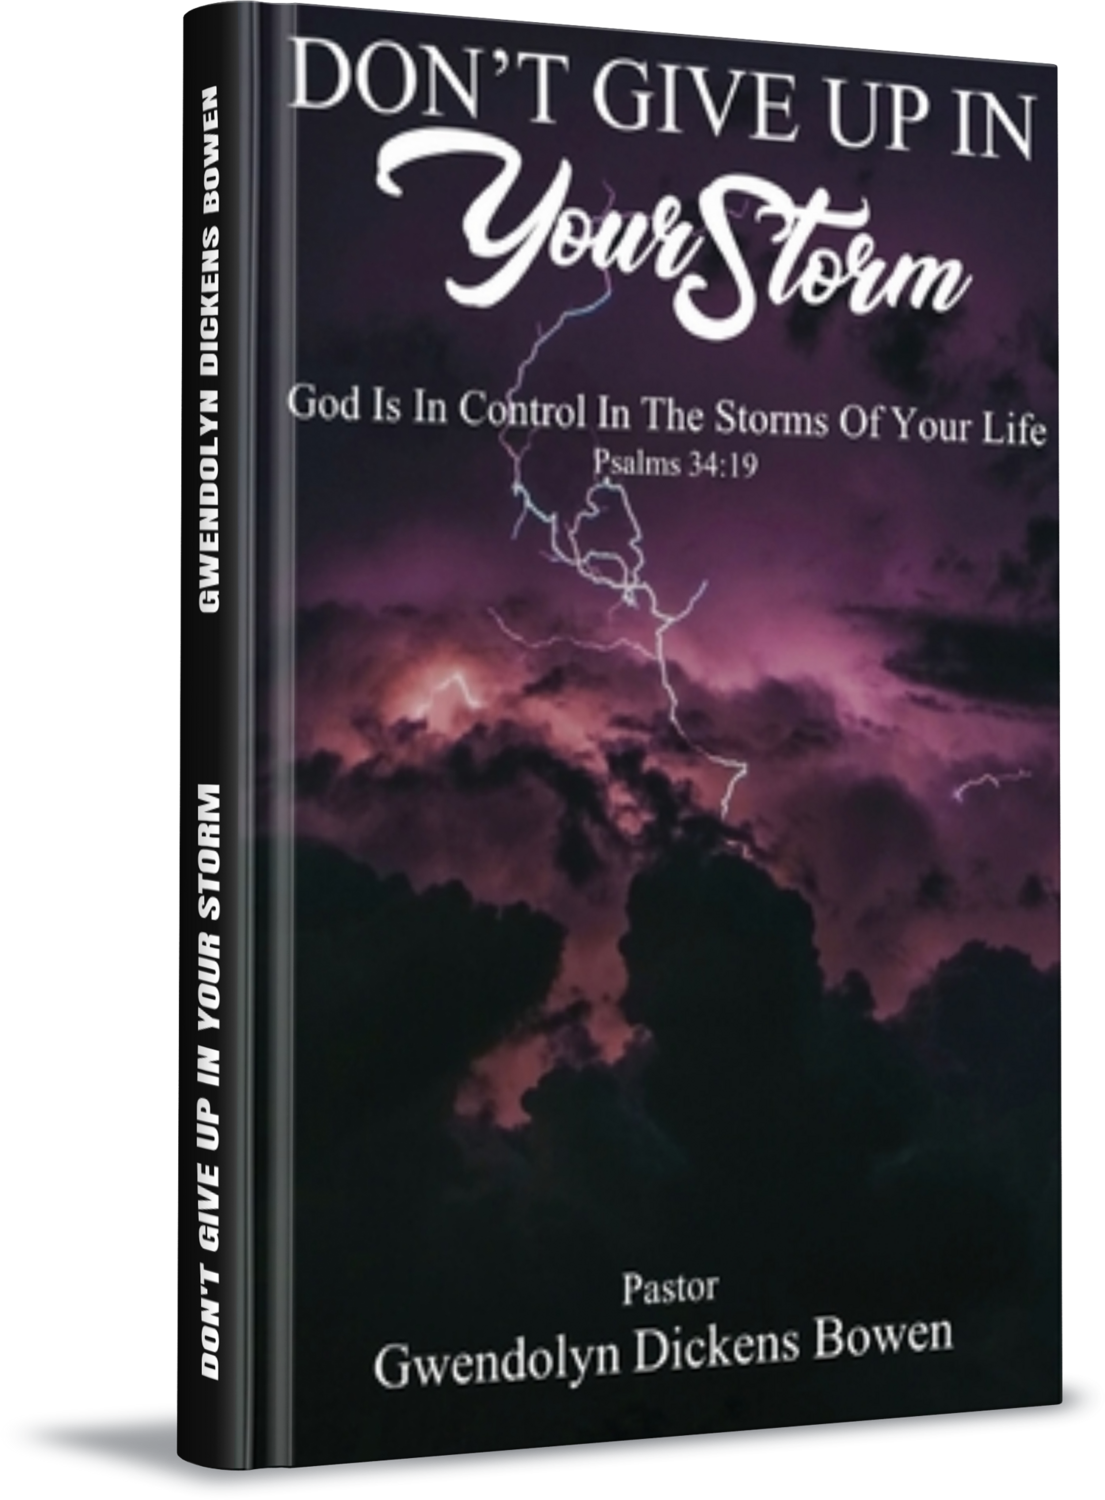 Don't Give Up In Your Storm: God Is In Control In the Storms of Your Life